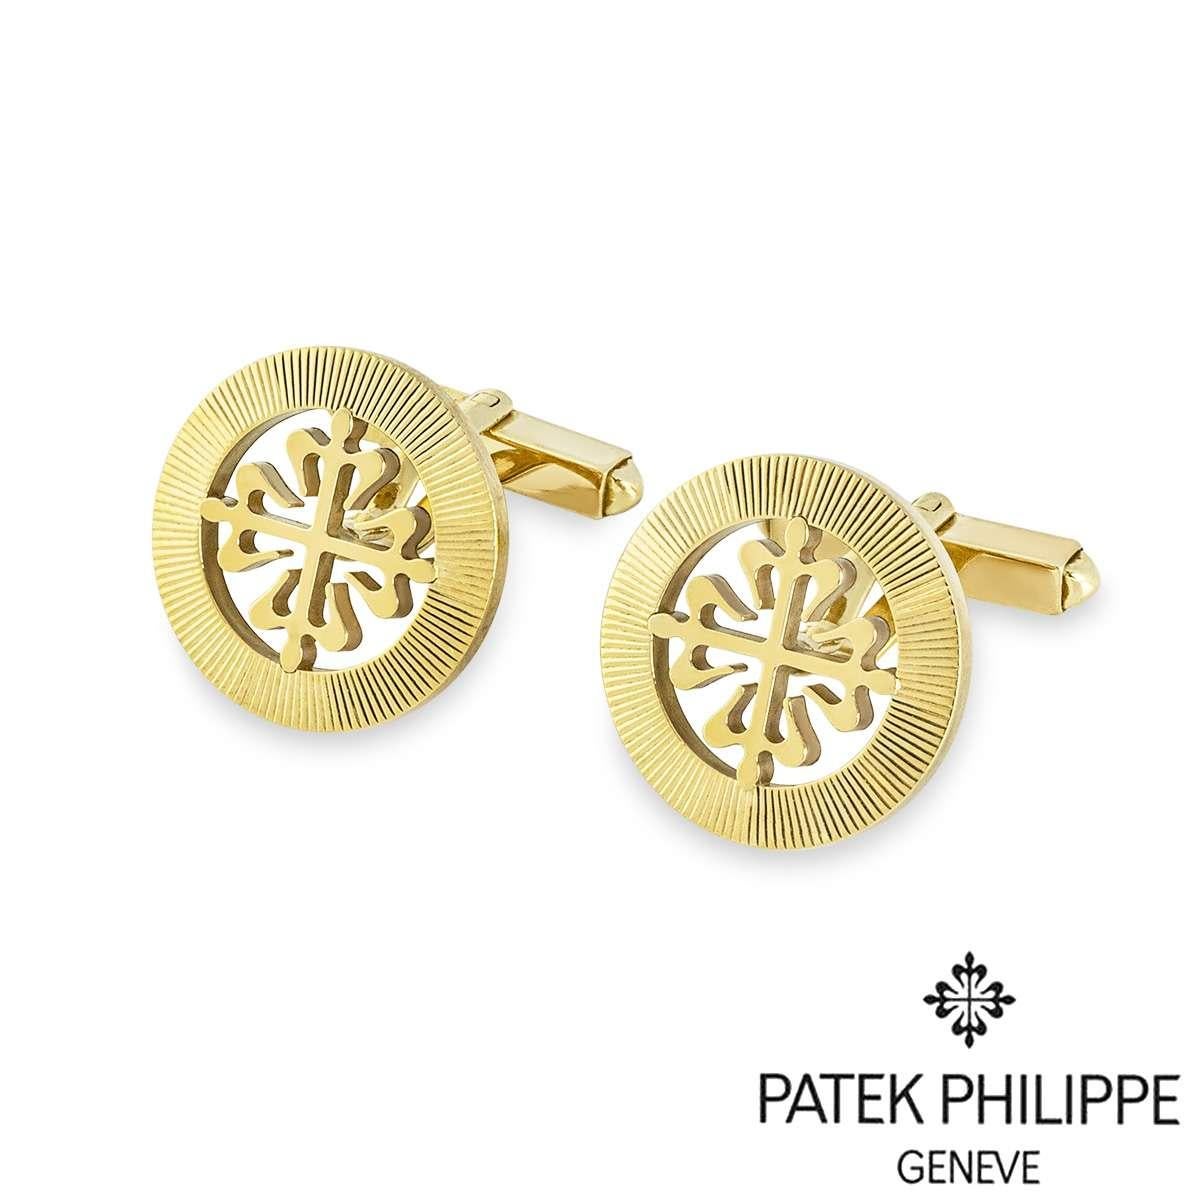 A pair of 18k yellow gold Calatrava cufflinks by Patek Philippe. The cufflinks feature the classic Calatrava cross motif, surrounded by a guilloche outer edge ring. The cufflinks have t-bar fittings and the motif measures 18mm in diameter. The